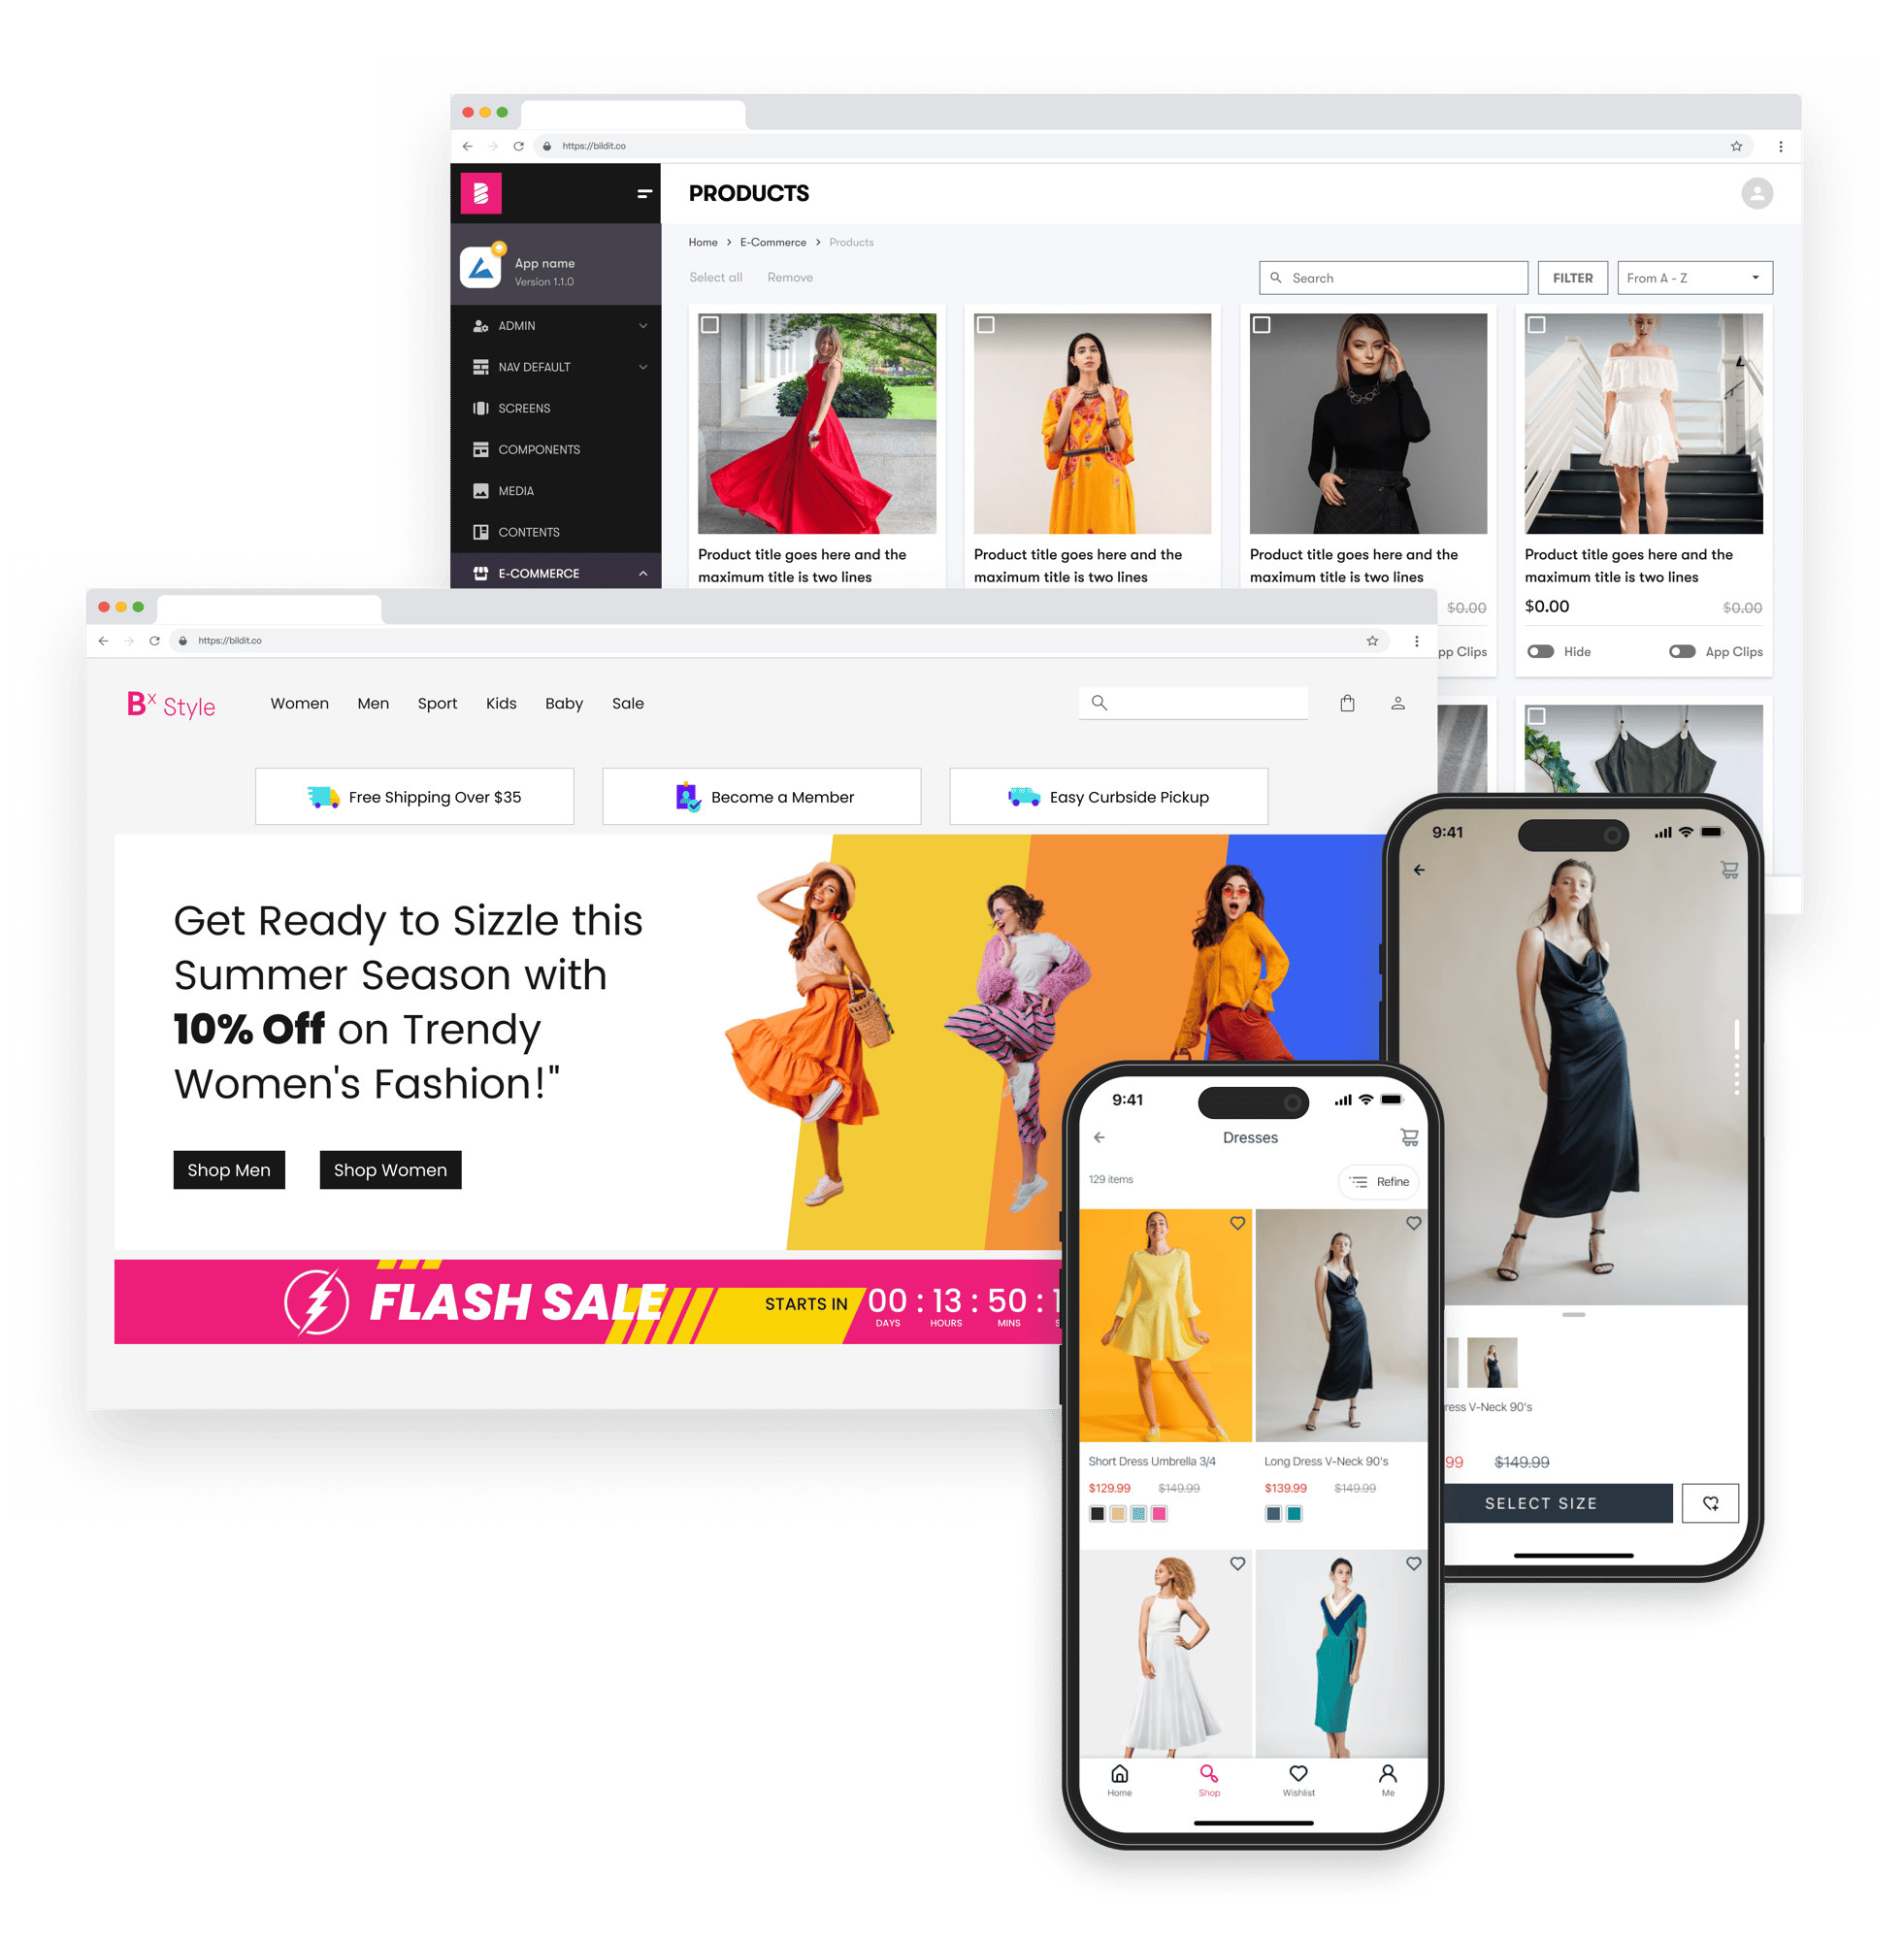 This image depicts a collage of multiple screenshots showcasing a fashion e-commerce platform. The upper left corner shows a desktop app interface with a menu bar on the left, displaying categories such as 'Home', 'Screens', 'Components', and highlighted 'E-commerce'. The main part of this screen shows a product management page with listings for women's dresses, with titles and prices. The lower left part shows a website's promotional section, with a banner that reads 